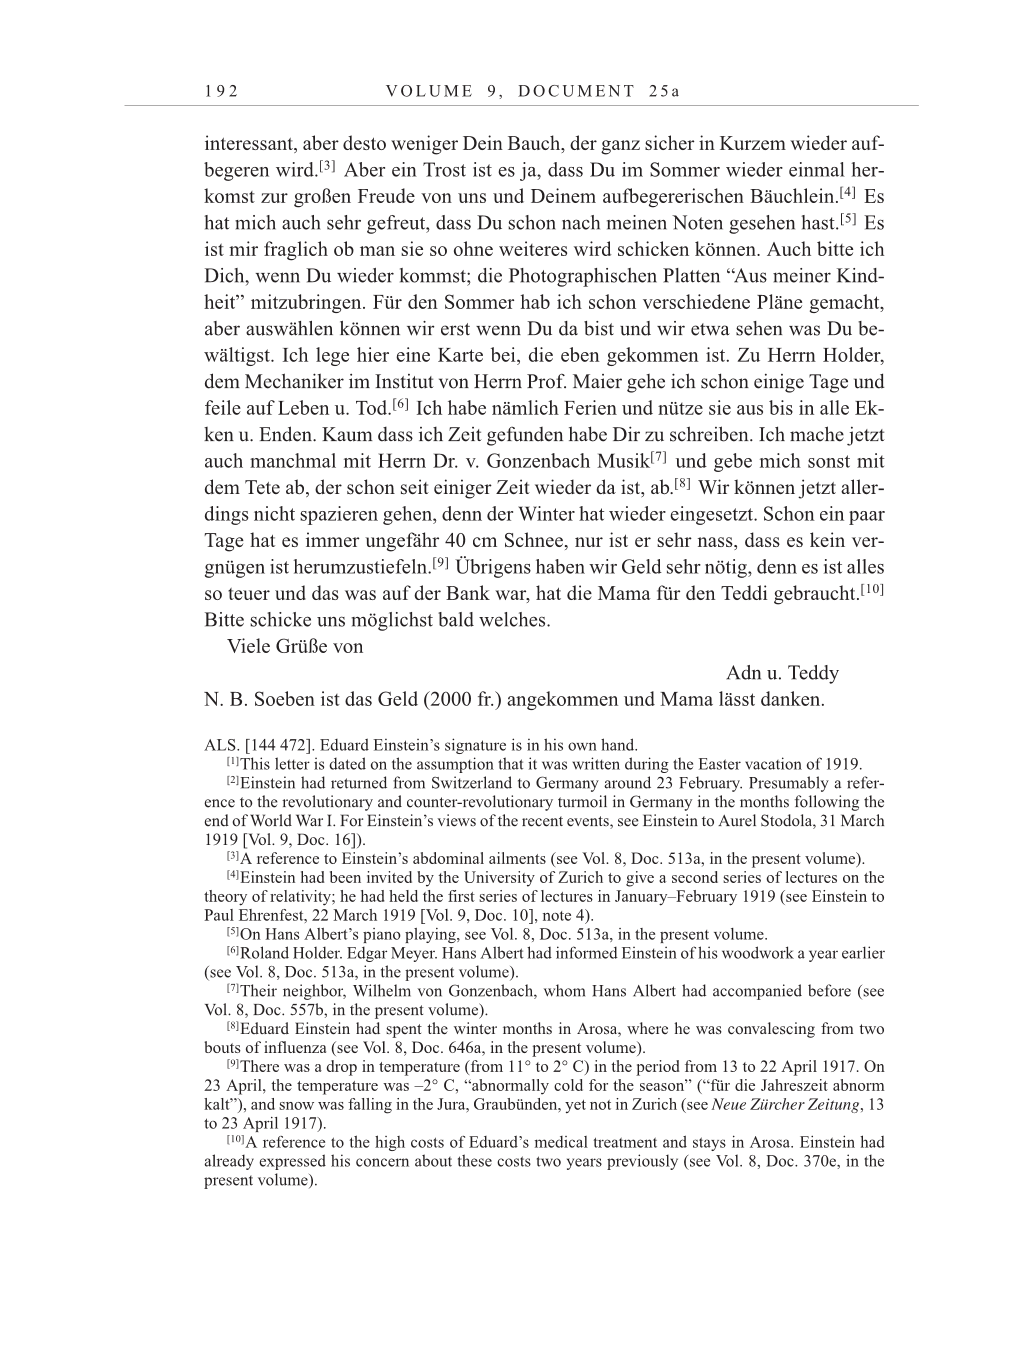 Volume 10: The Berlin Years: Correspondence May-December 1920 / Supplementary Correspondence 1909-1920 page 192